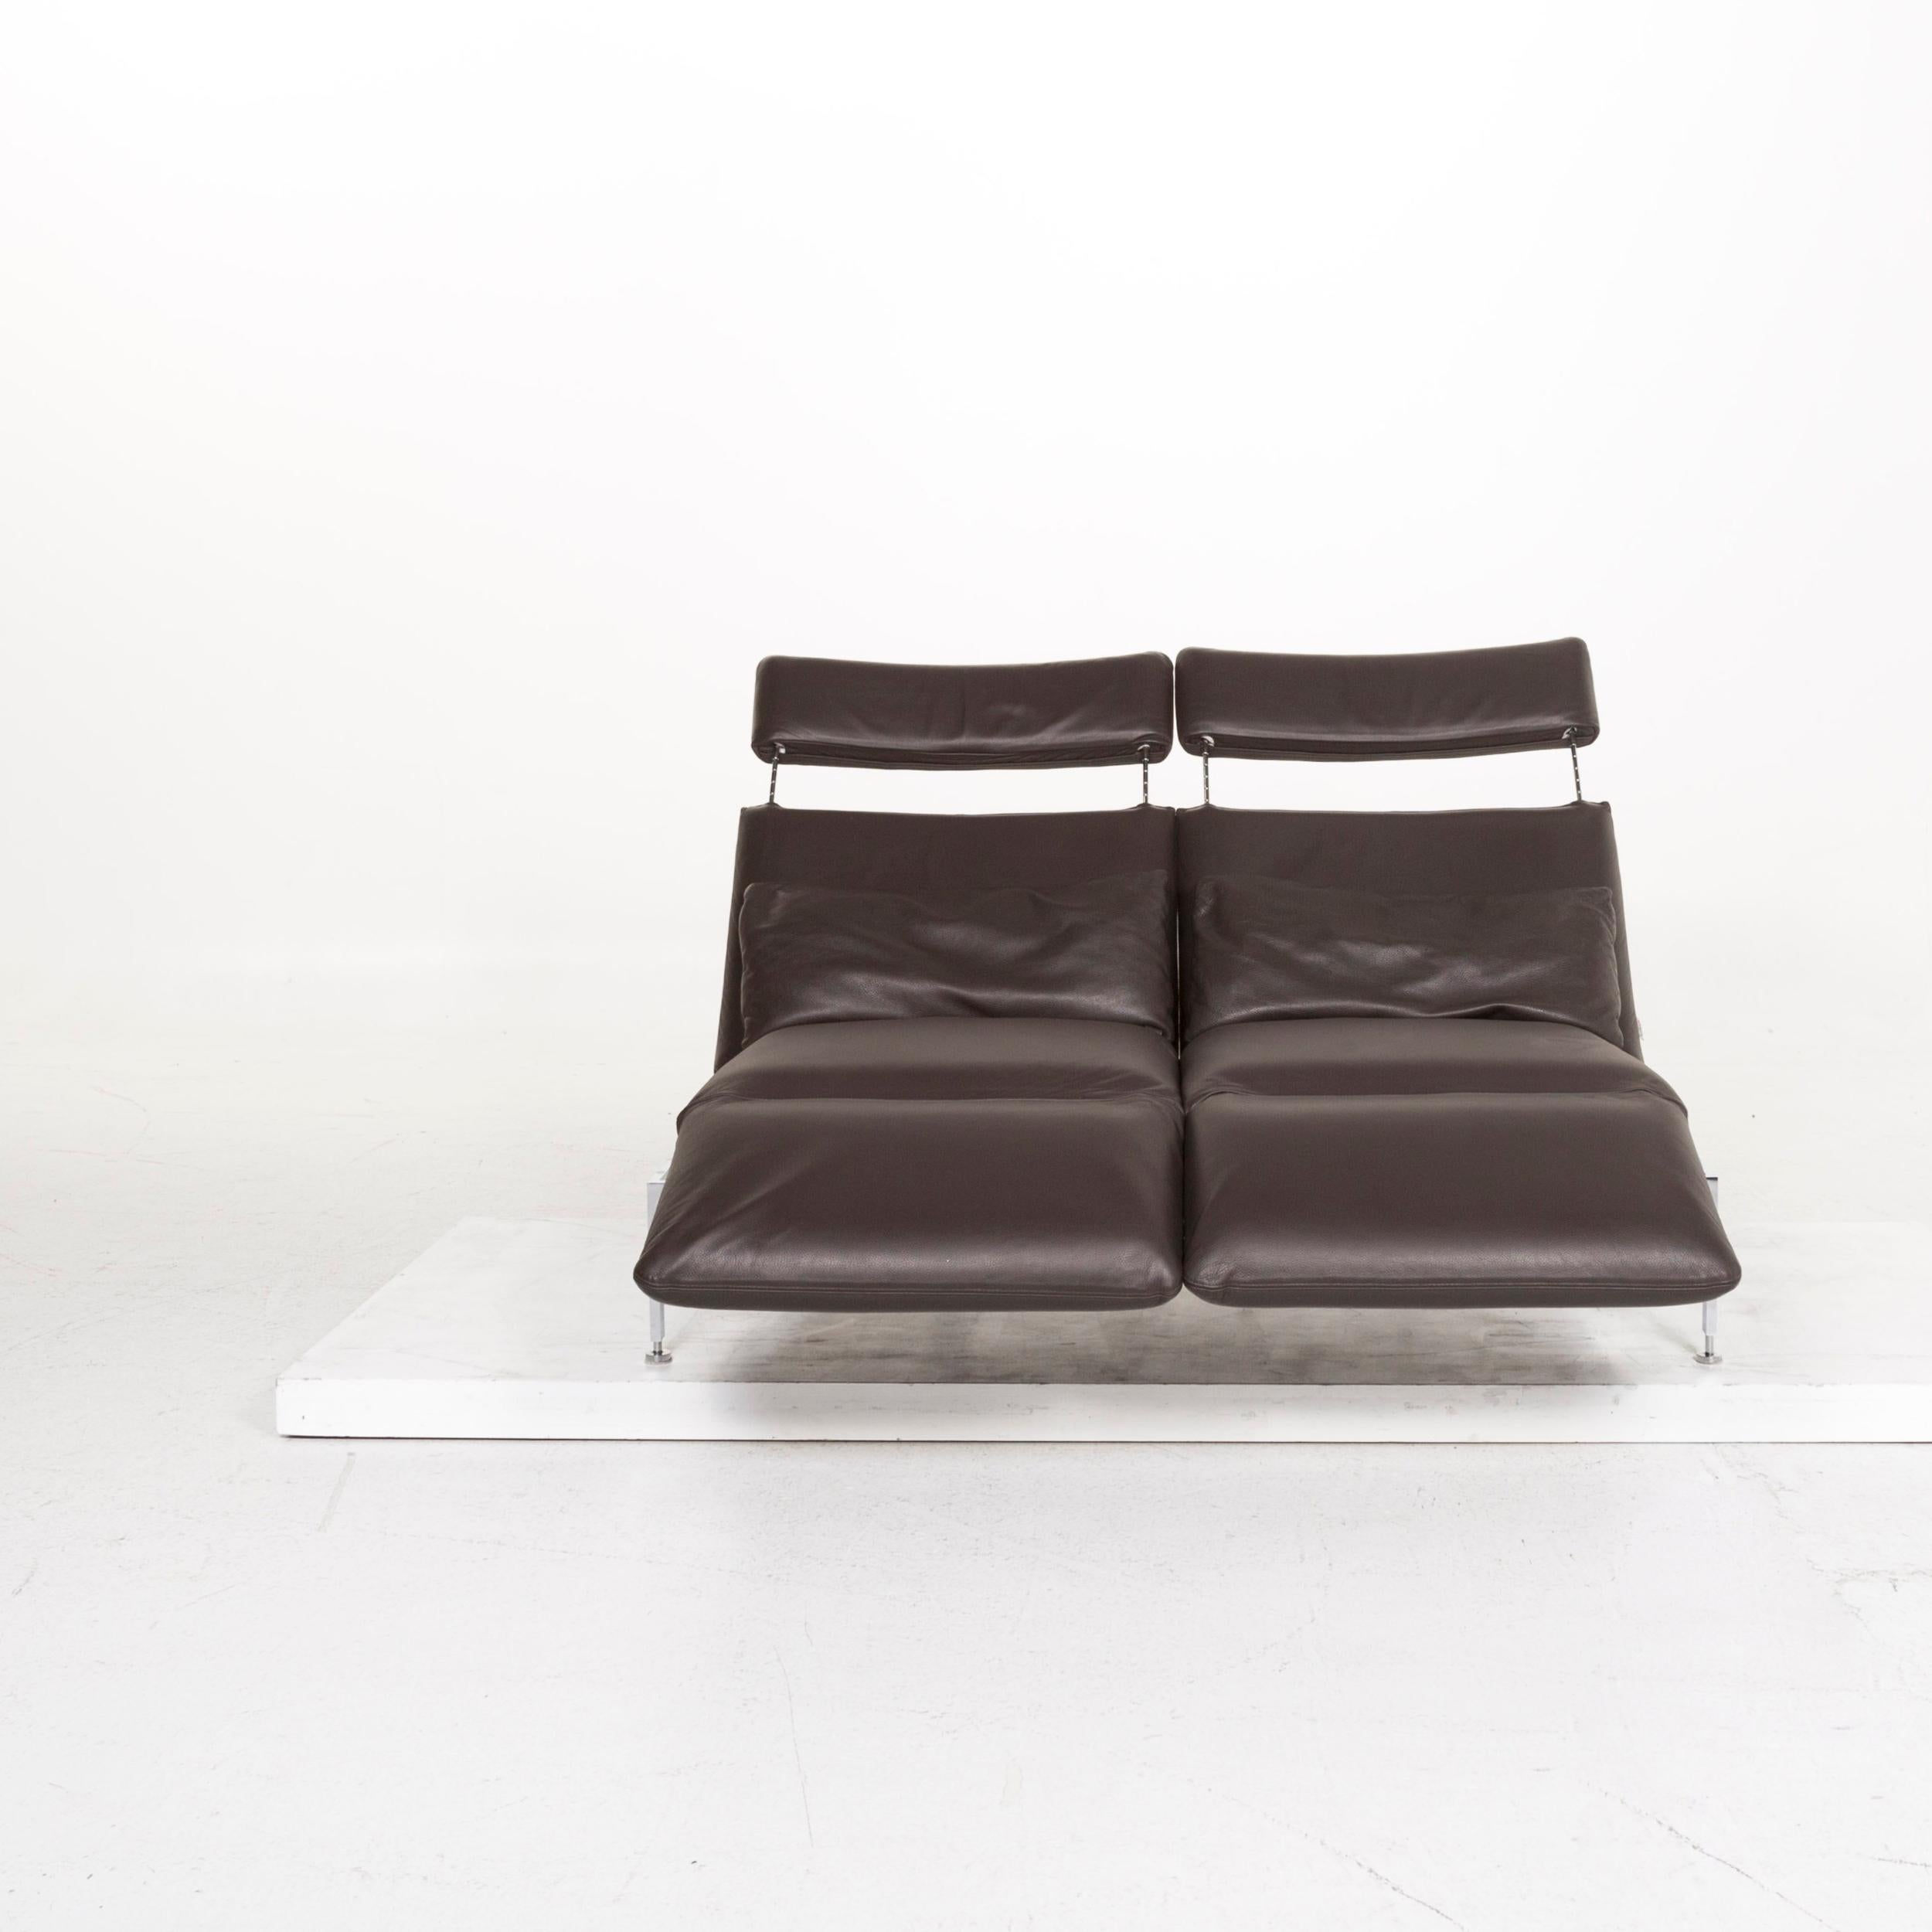 German Brühl & Sippold Roro Leather Sofa Brown Dark Brown Three-Seat Function Relax For Sale